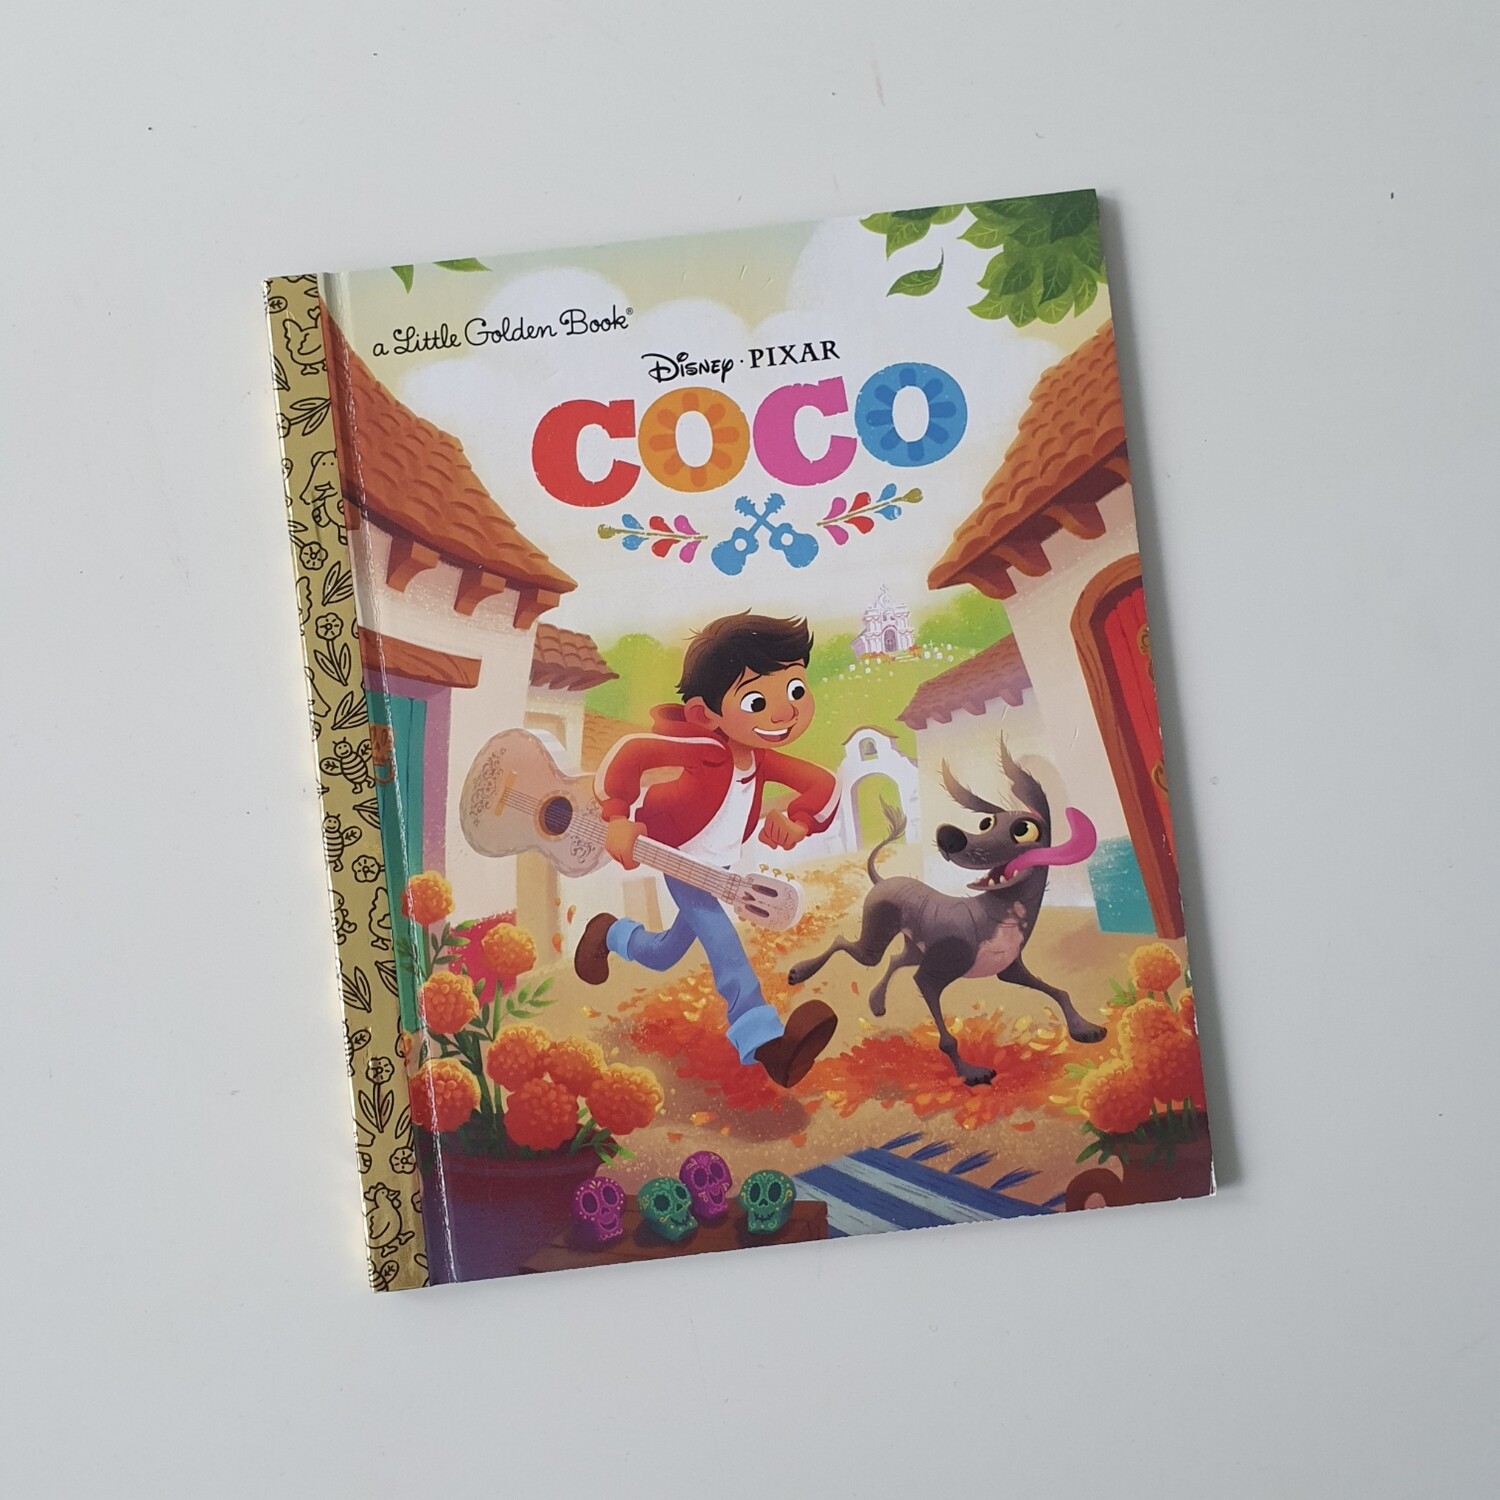 Coco Notebook - board book will come with metal book corners included